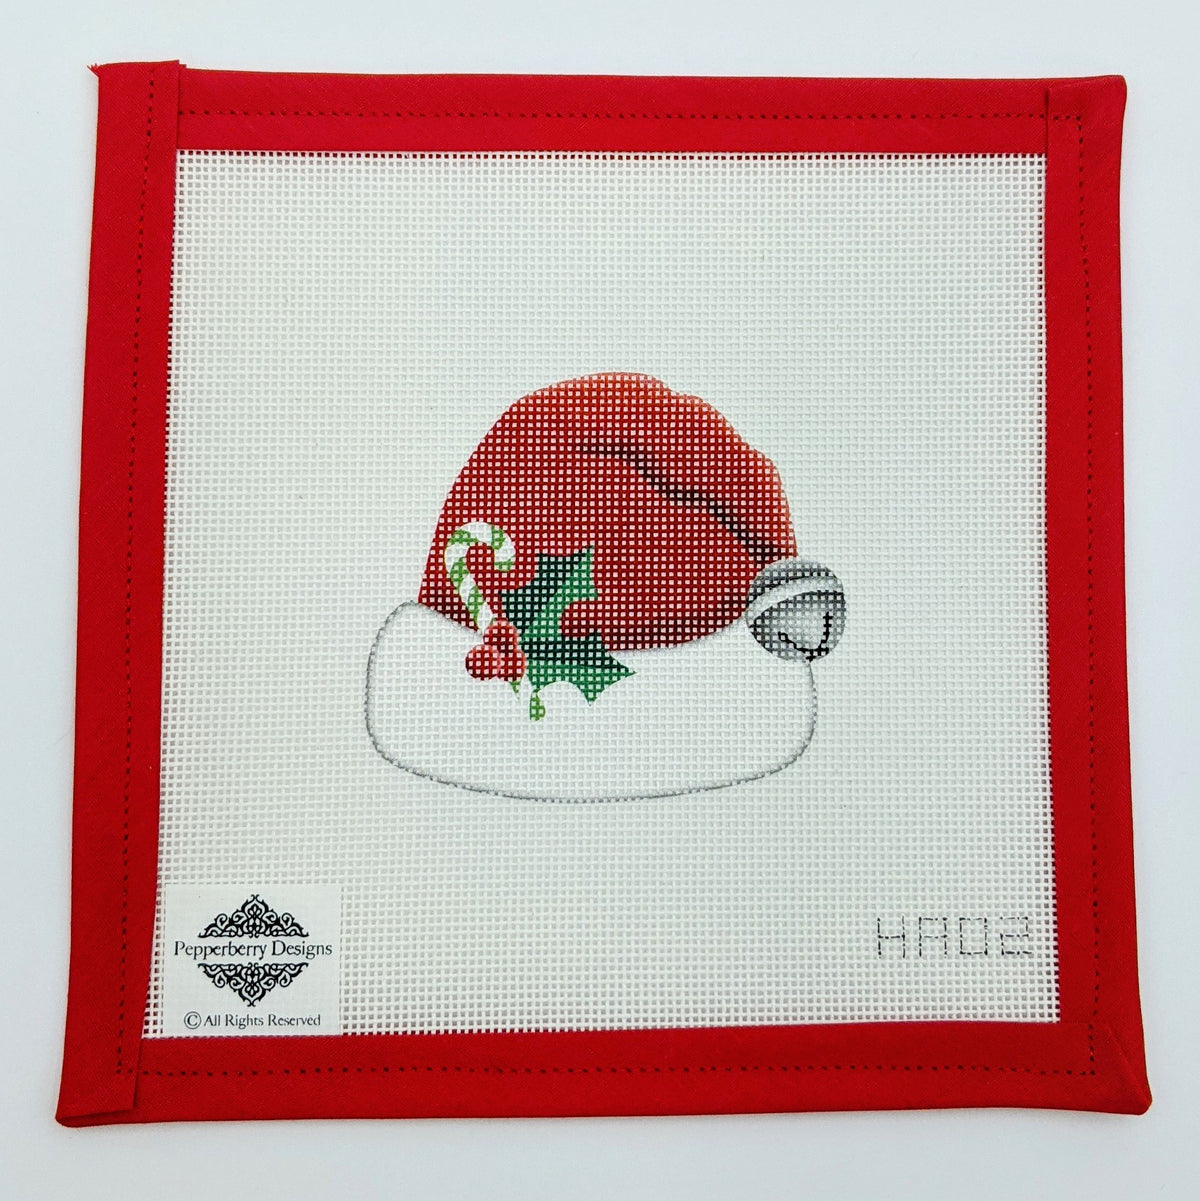 Santa Hat with Bell